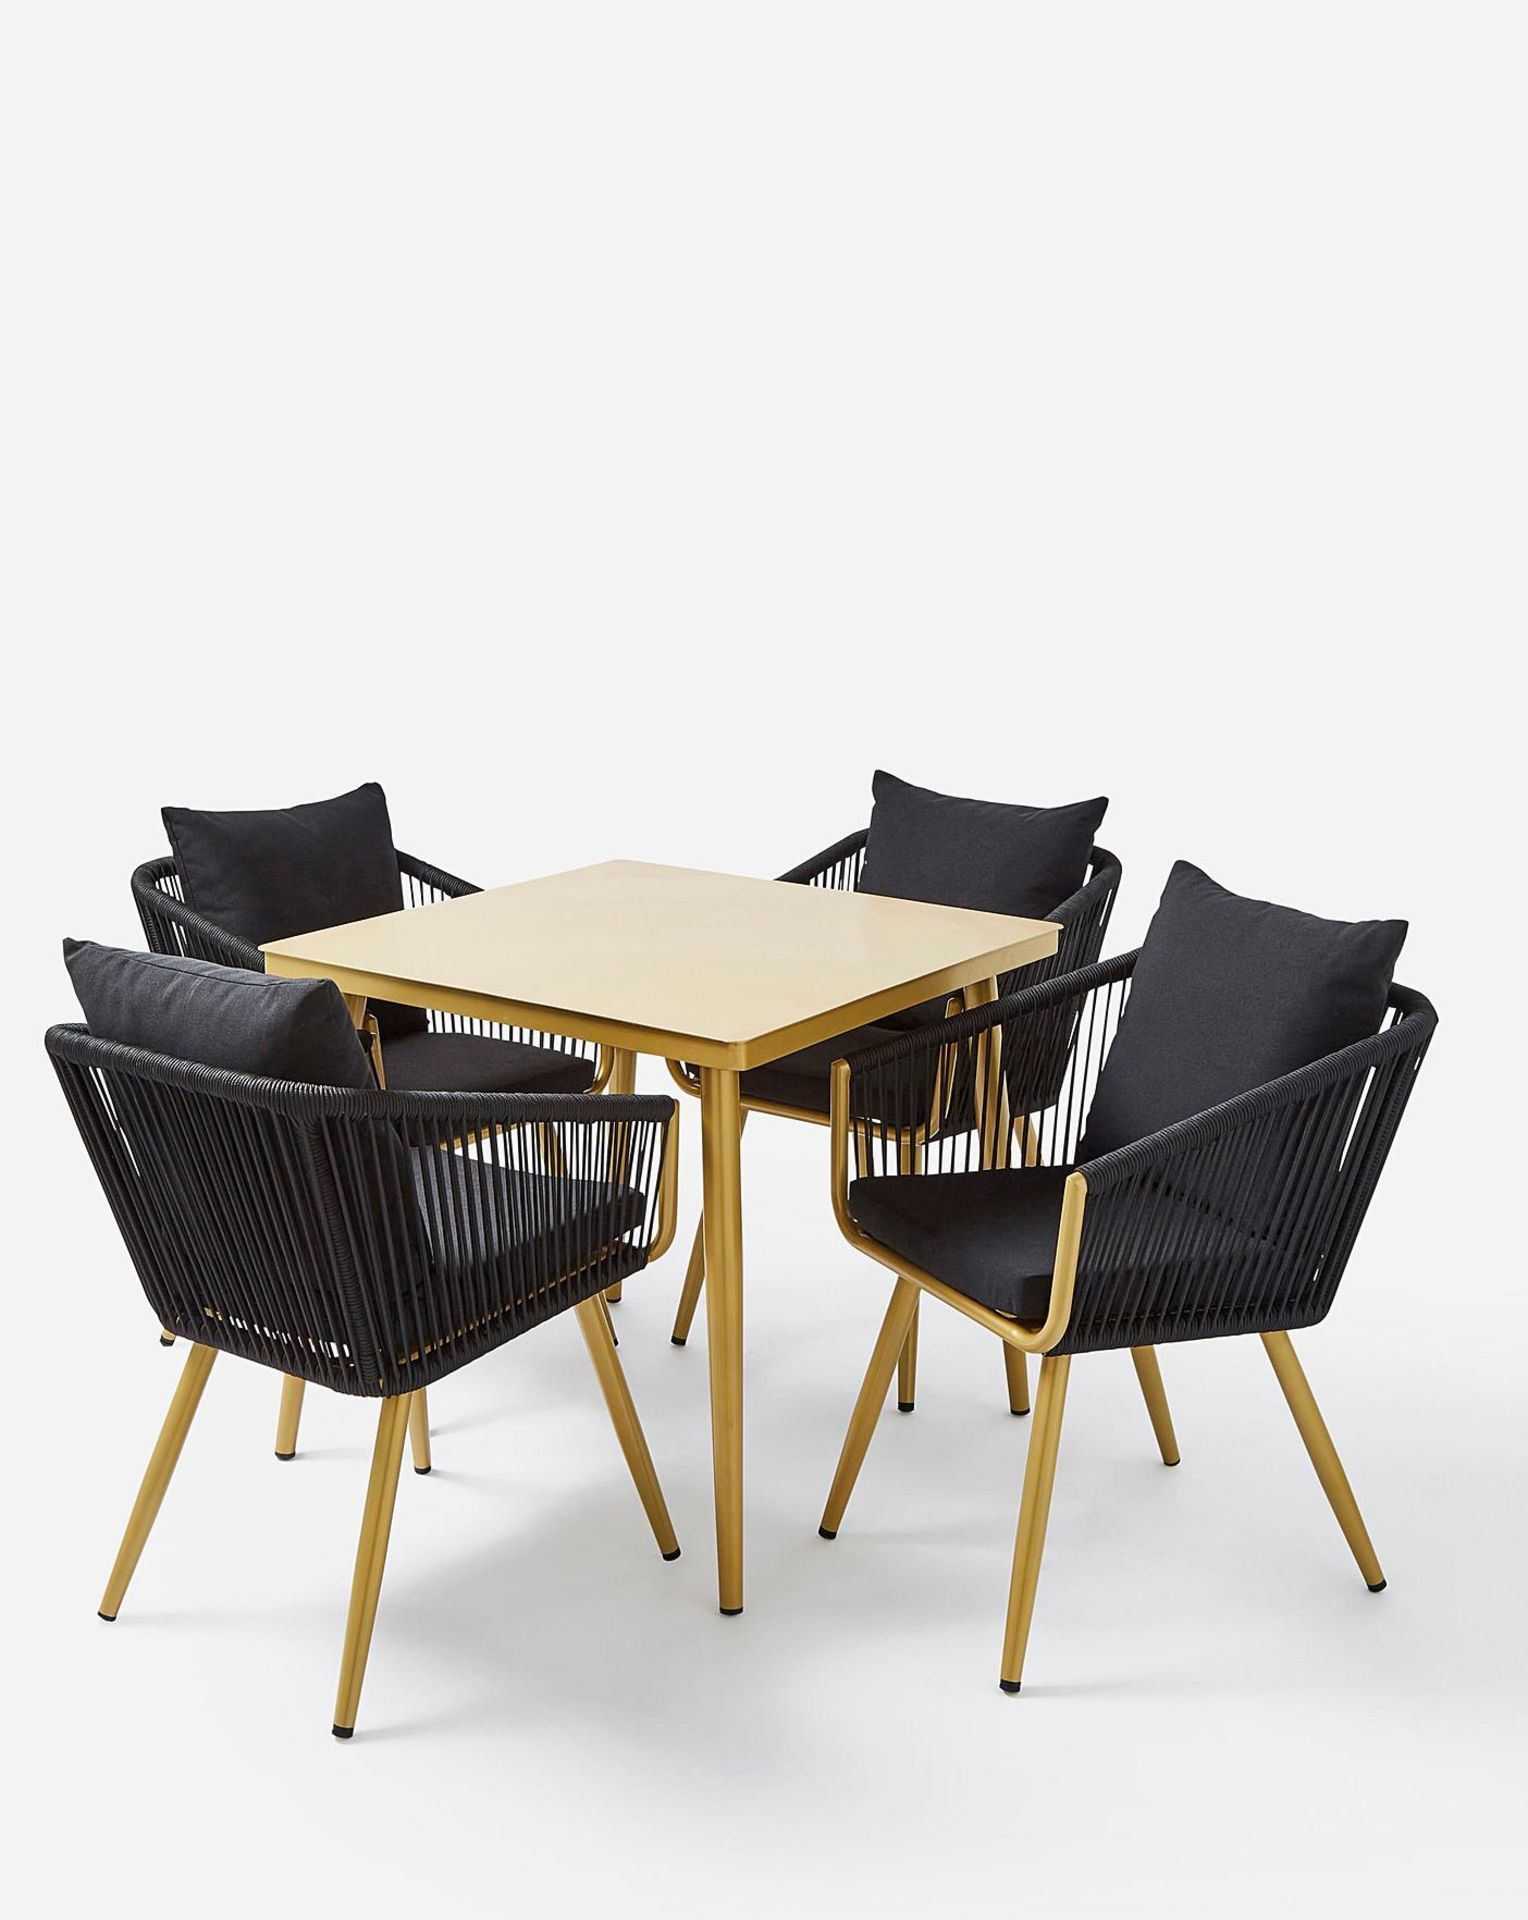 Trade Lot 4 x New & Packaged Joanna Hope Naya 4 Seater Dining Sets. RRP £719 each. This Exclusive - Image 8 of 11